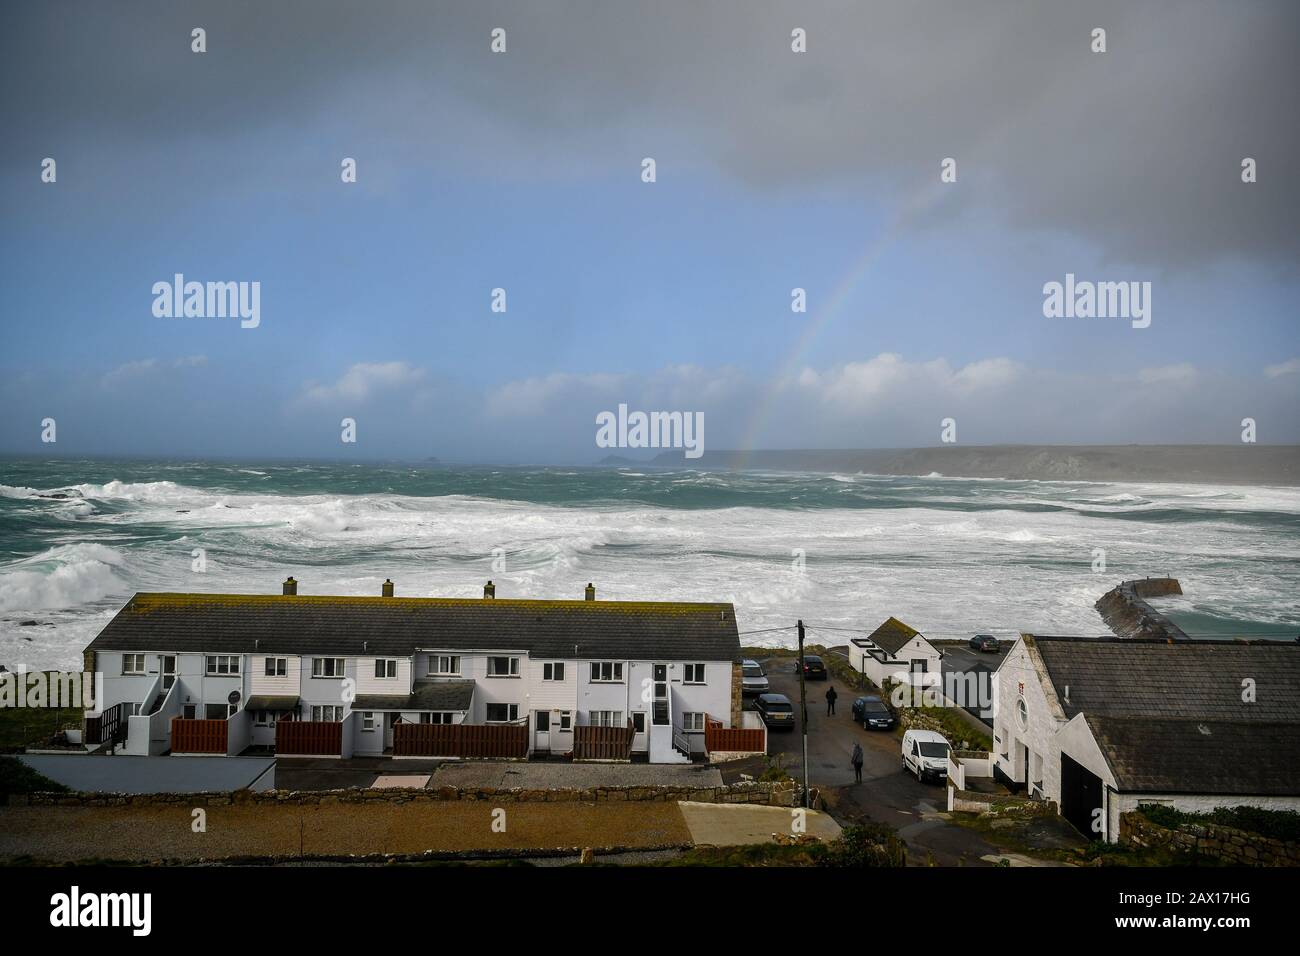 Rough seas beyond cottages in Sennen Cove, near Land's End, Cornwall, where a yellow wind warning is still in force as storm Ciara remains over some parts of the UK. Stock Photo